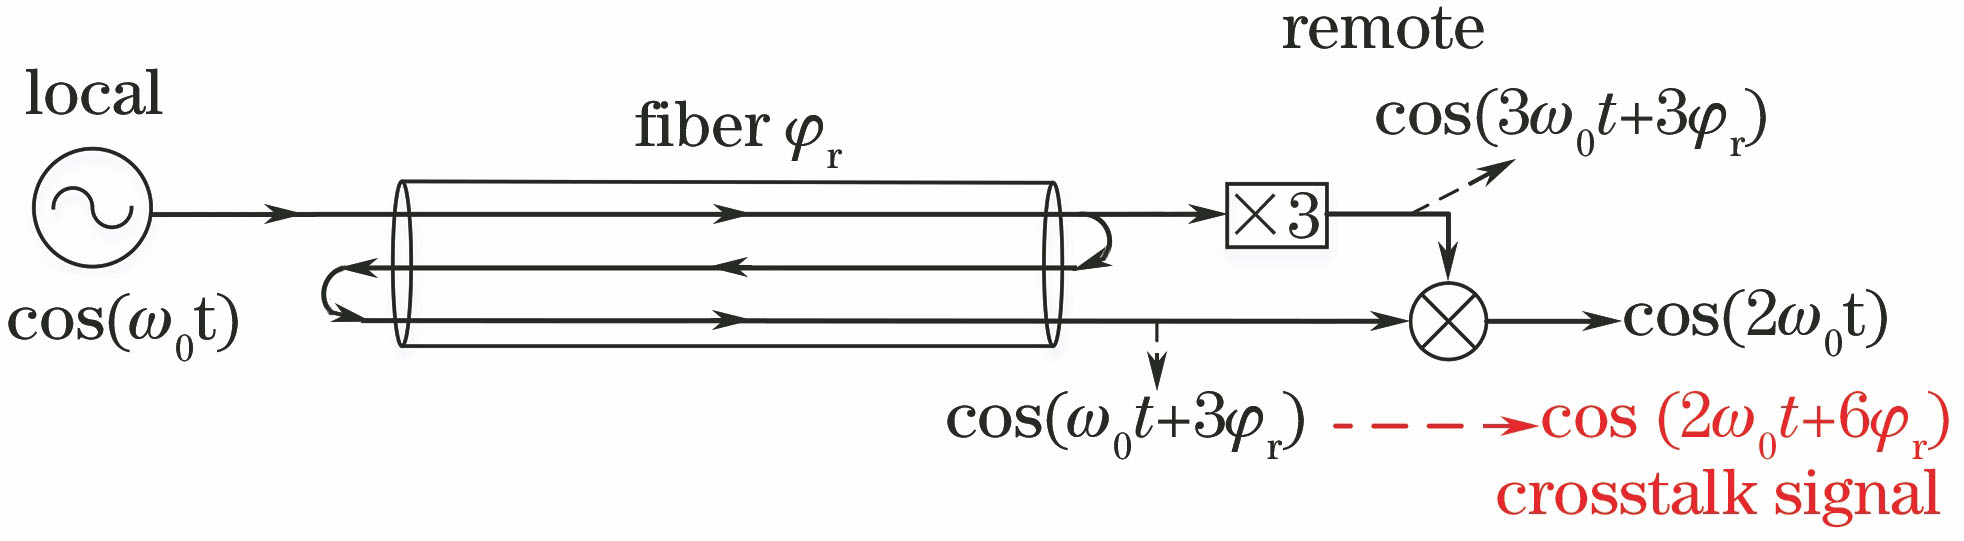 Fiber frequency transfer through phase fluctuation compensation at remote